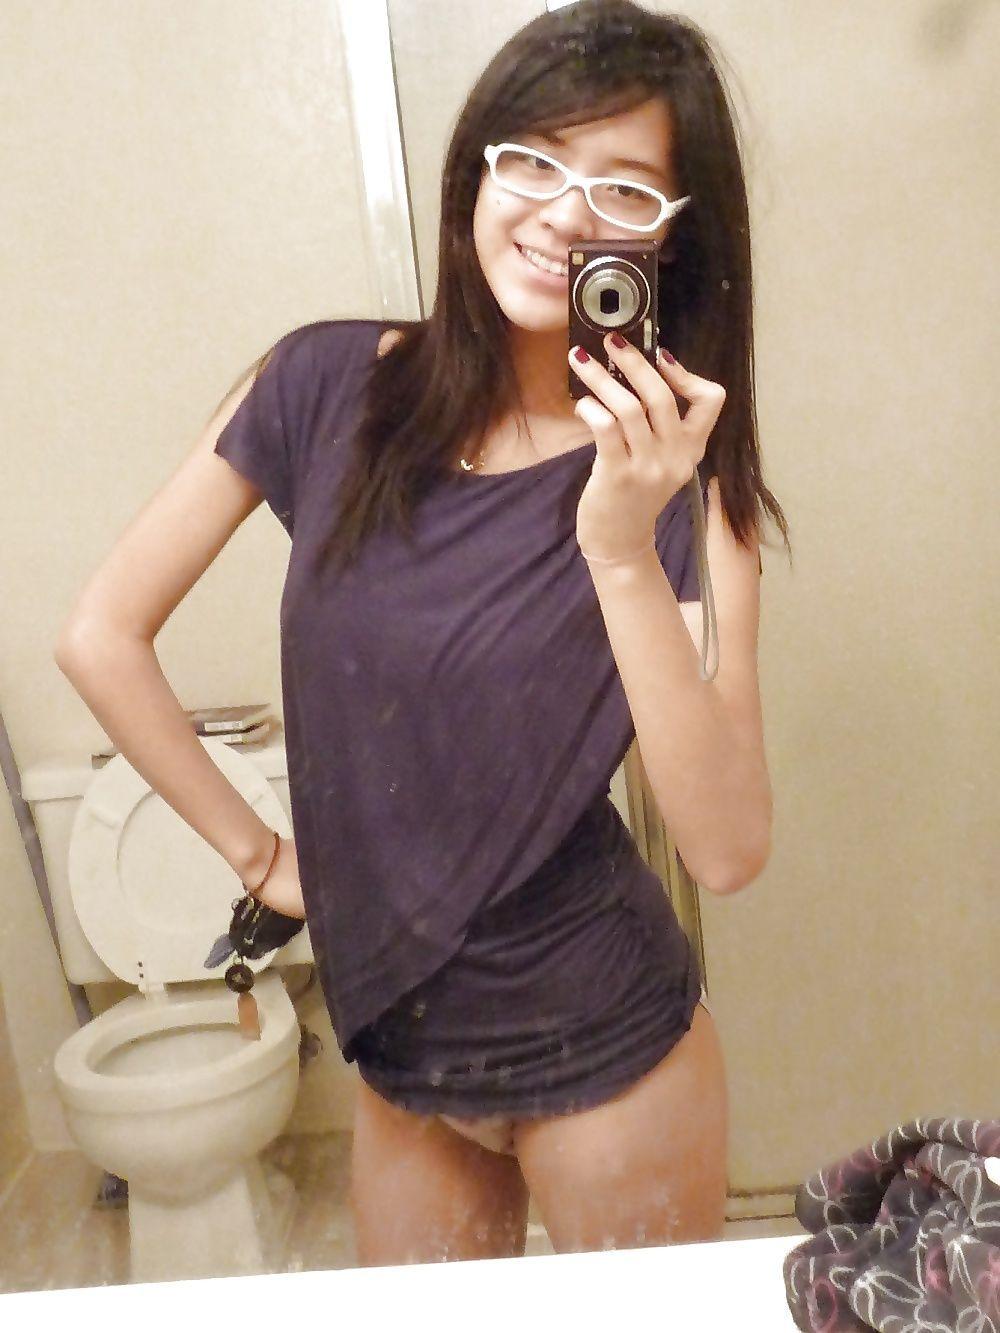 best of Glasses porn pictures Asian girls